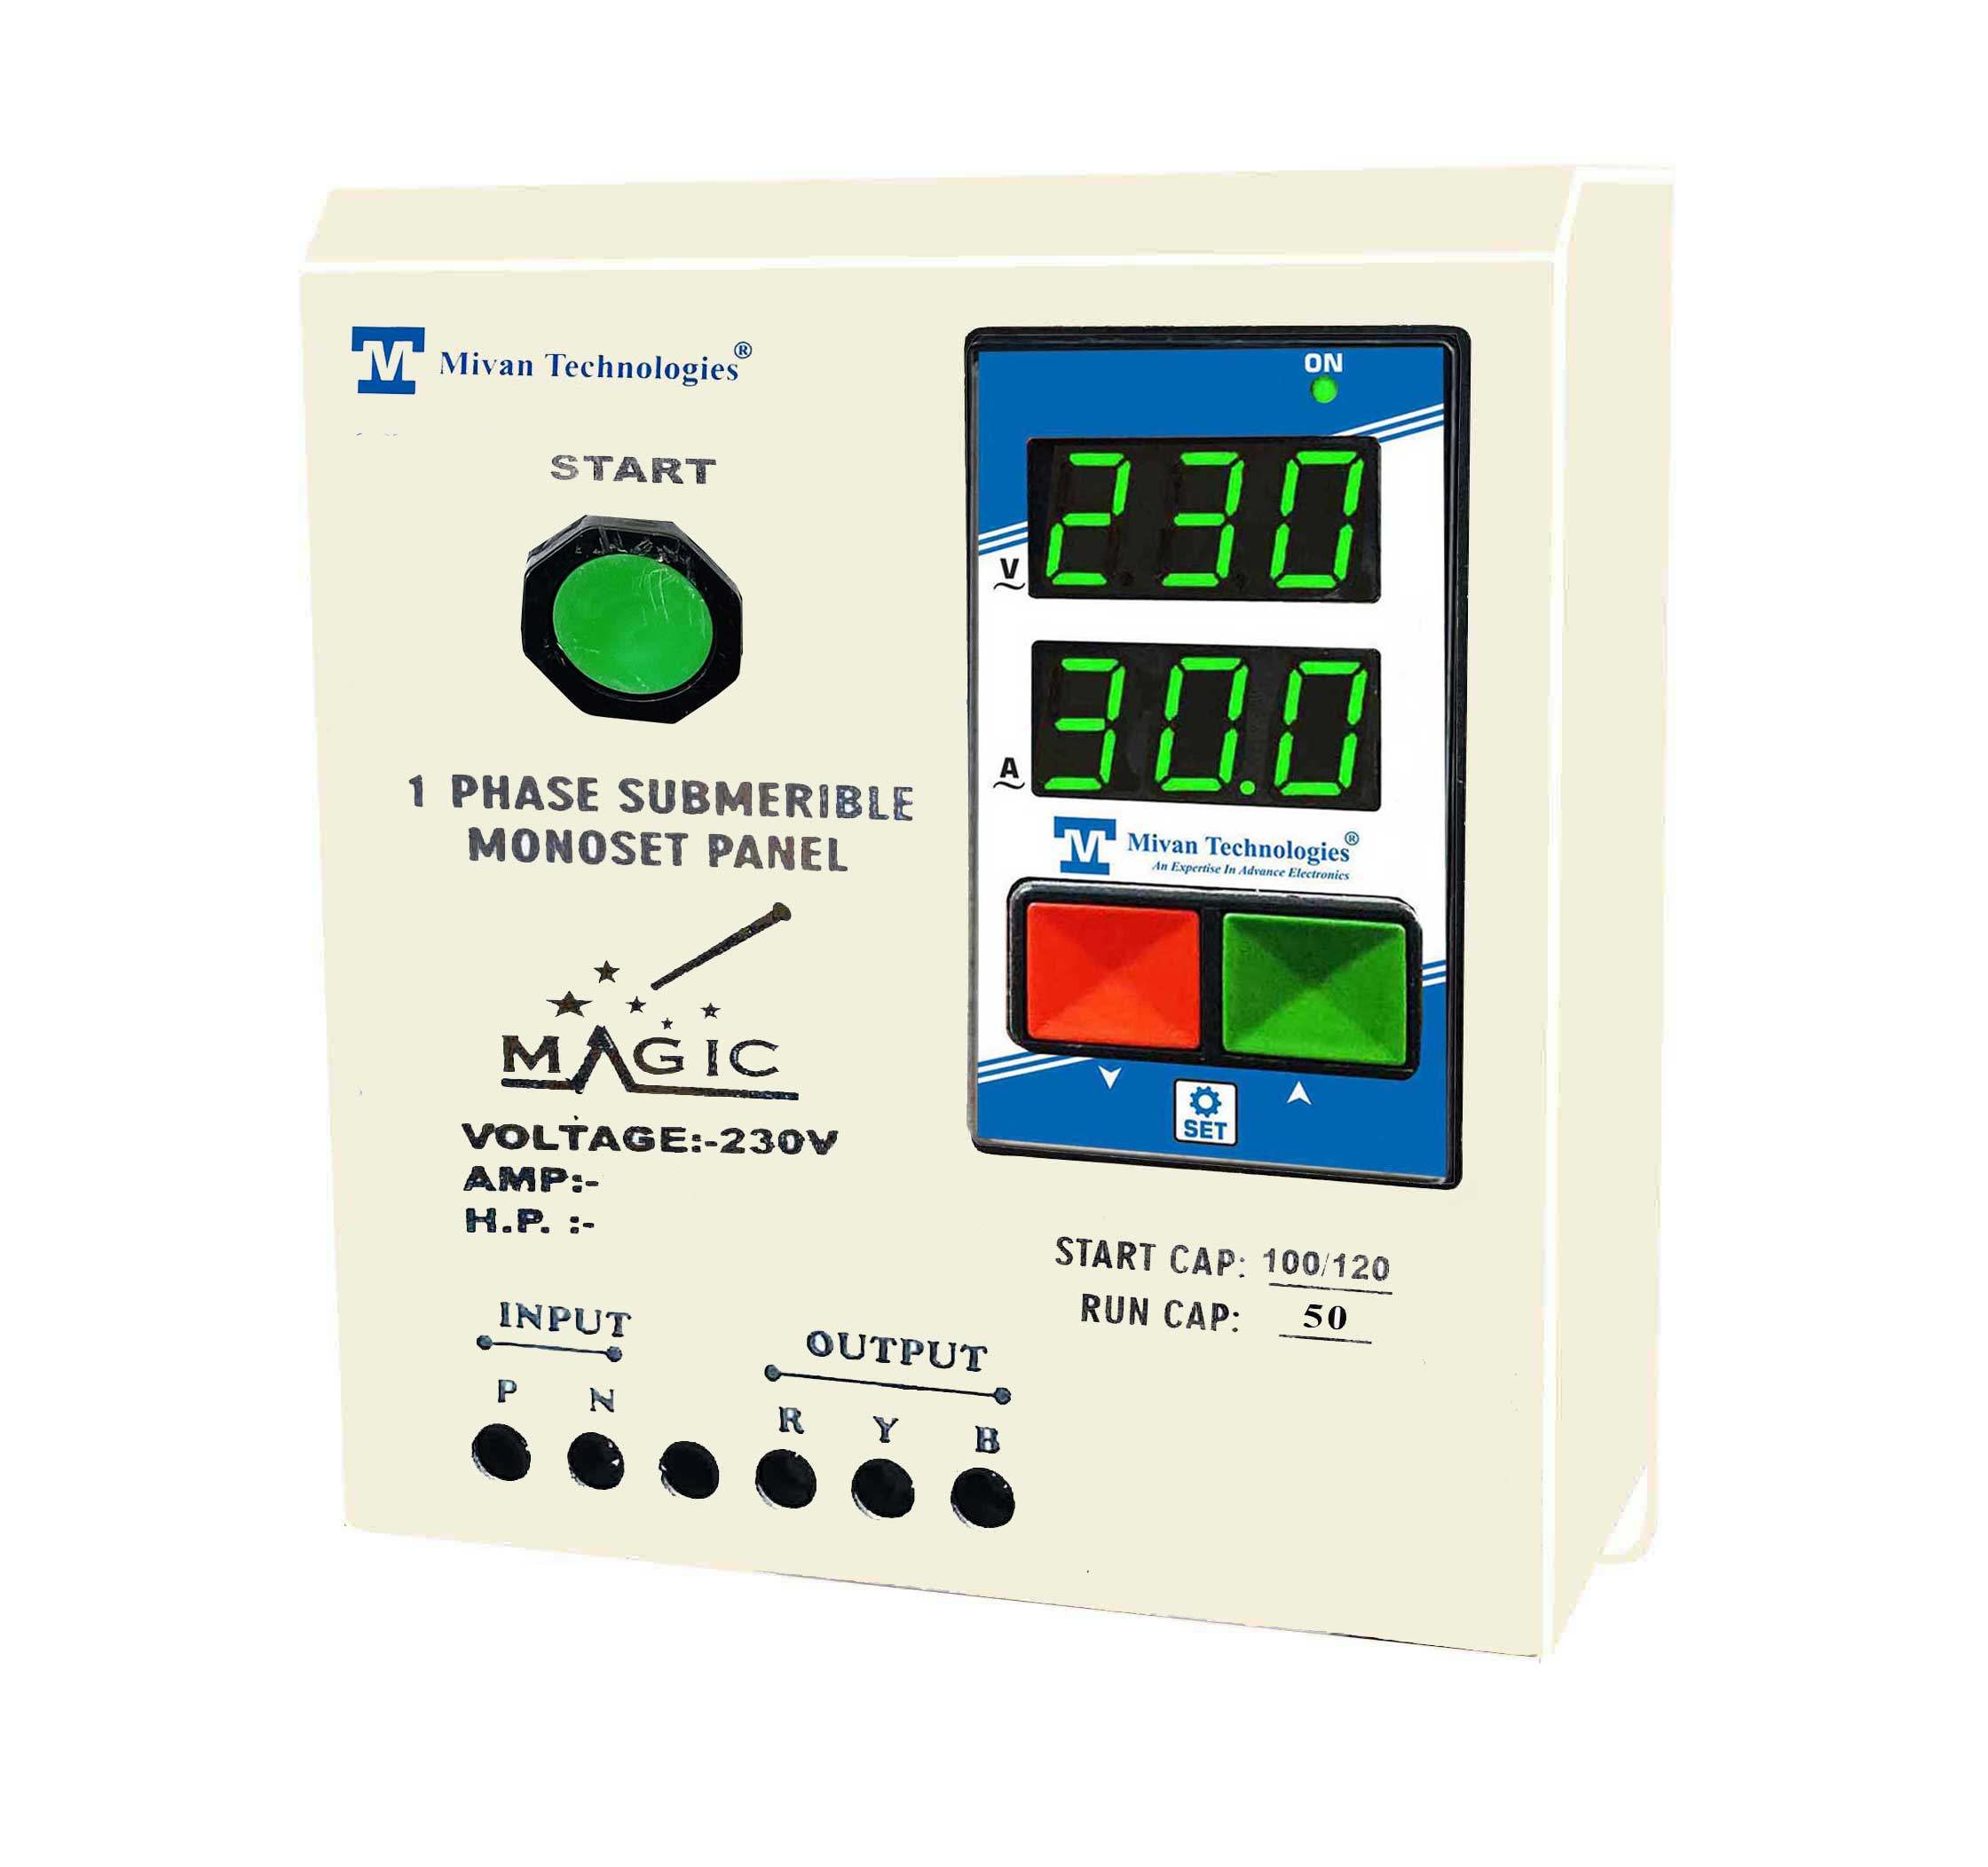 DS SR ABS Digital motor starter panel with volt and amp meter with HV LV OL DRY RUN Protection with timer suitable up to 1.5 hp